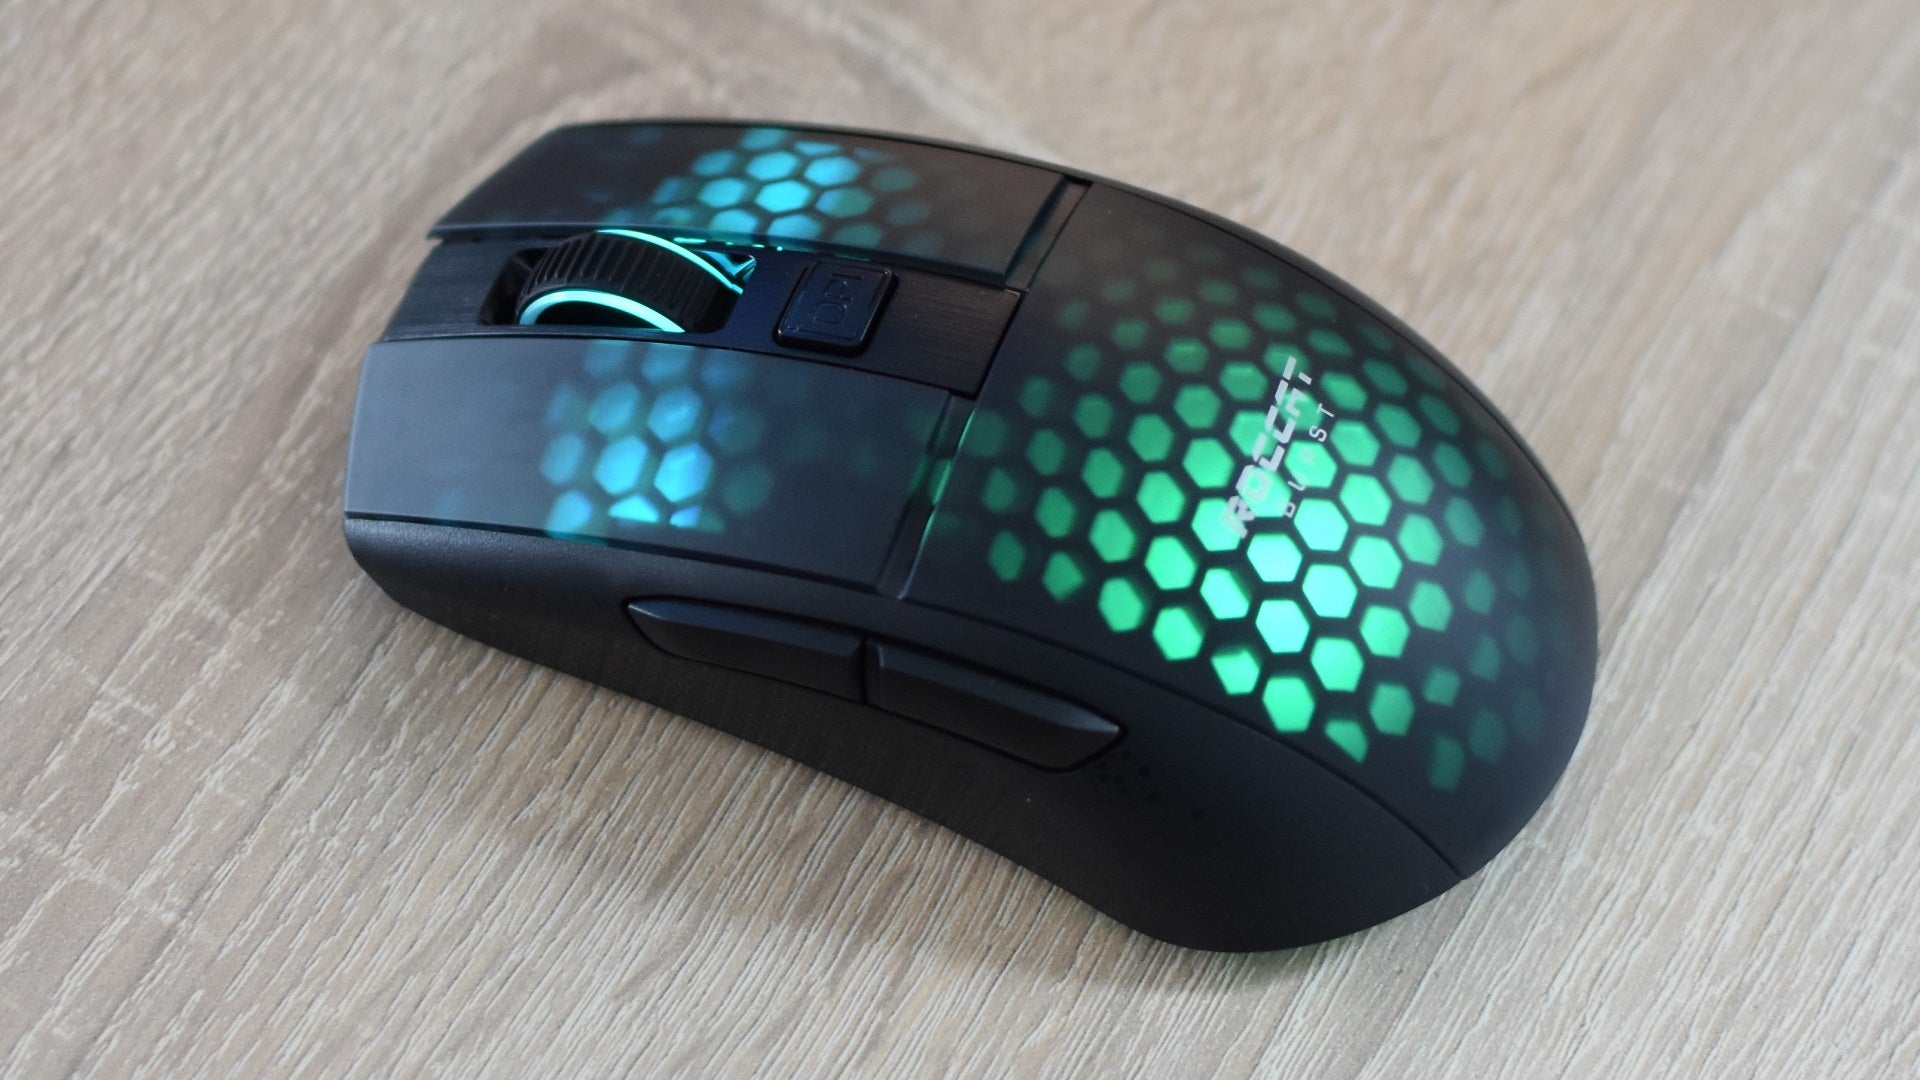 The Roccat Burst Pro Air gaming mouse on a desk.